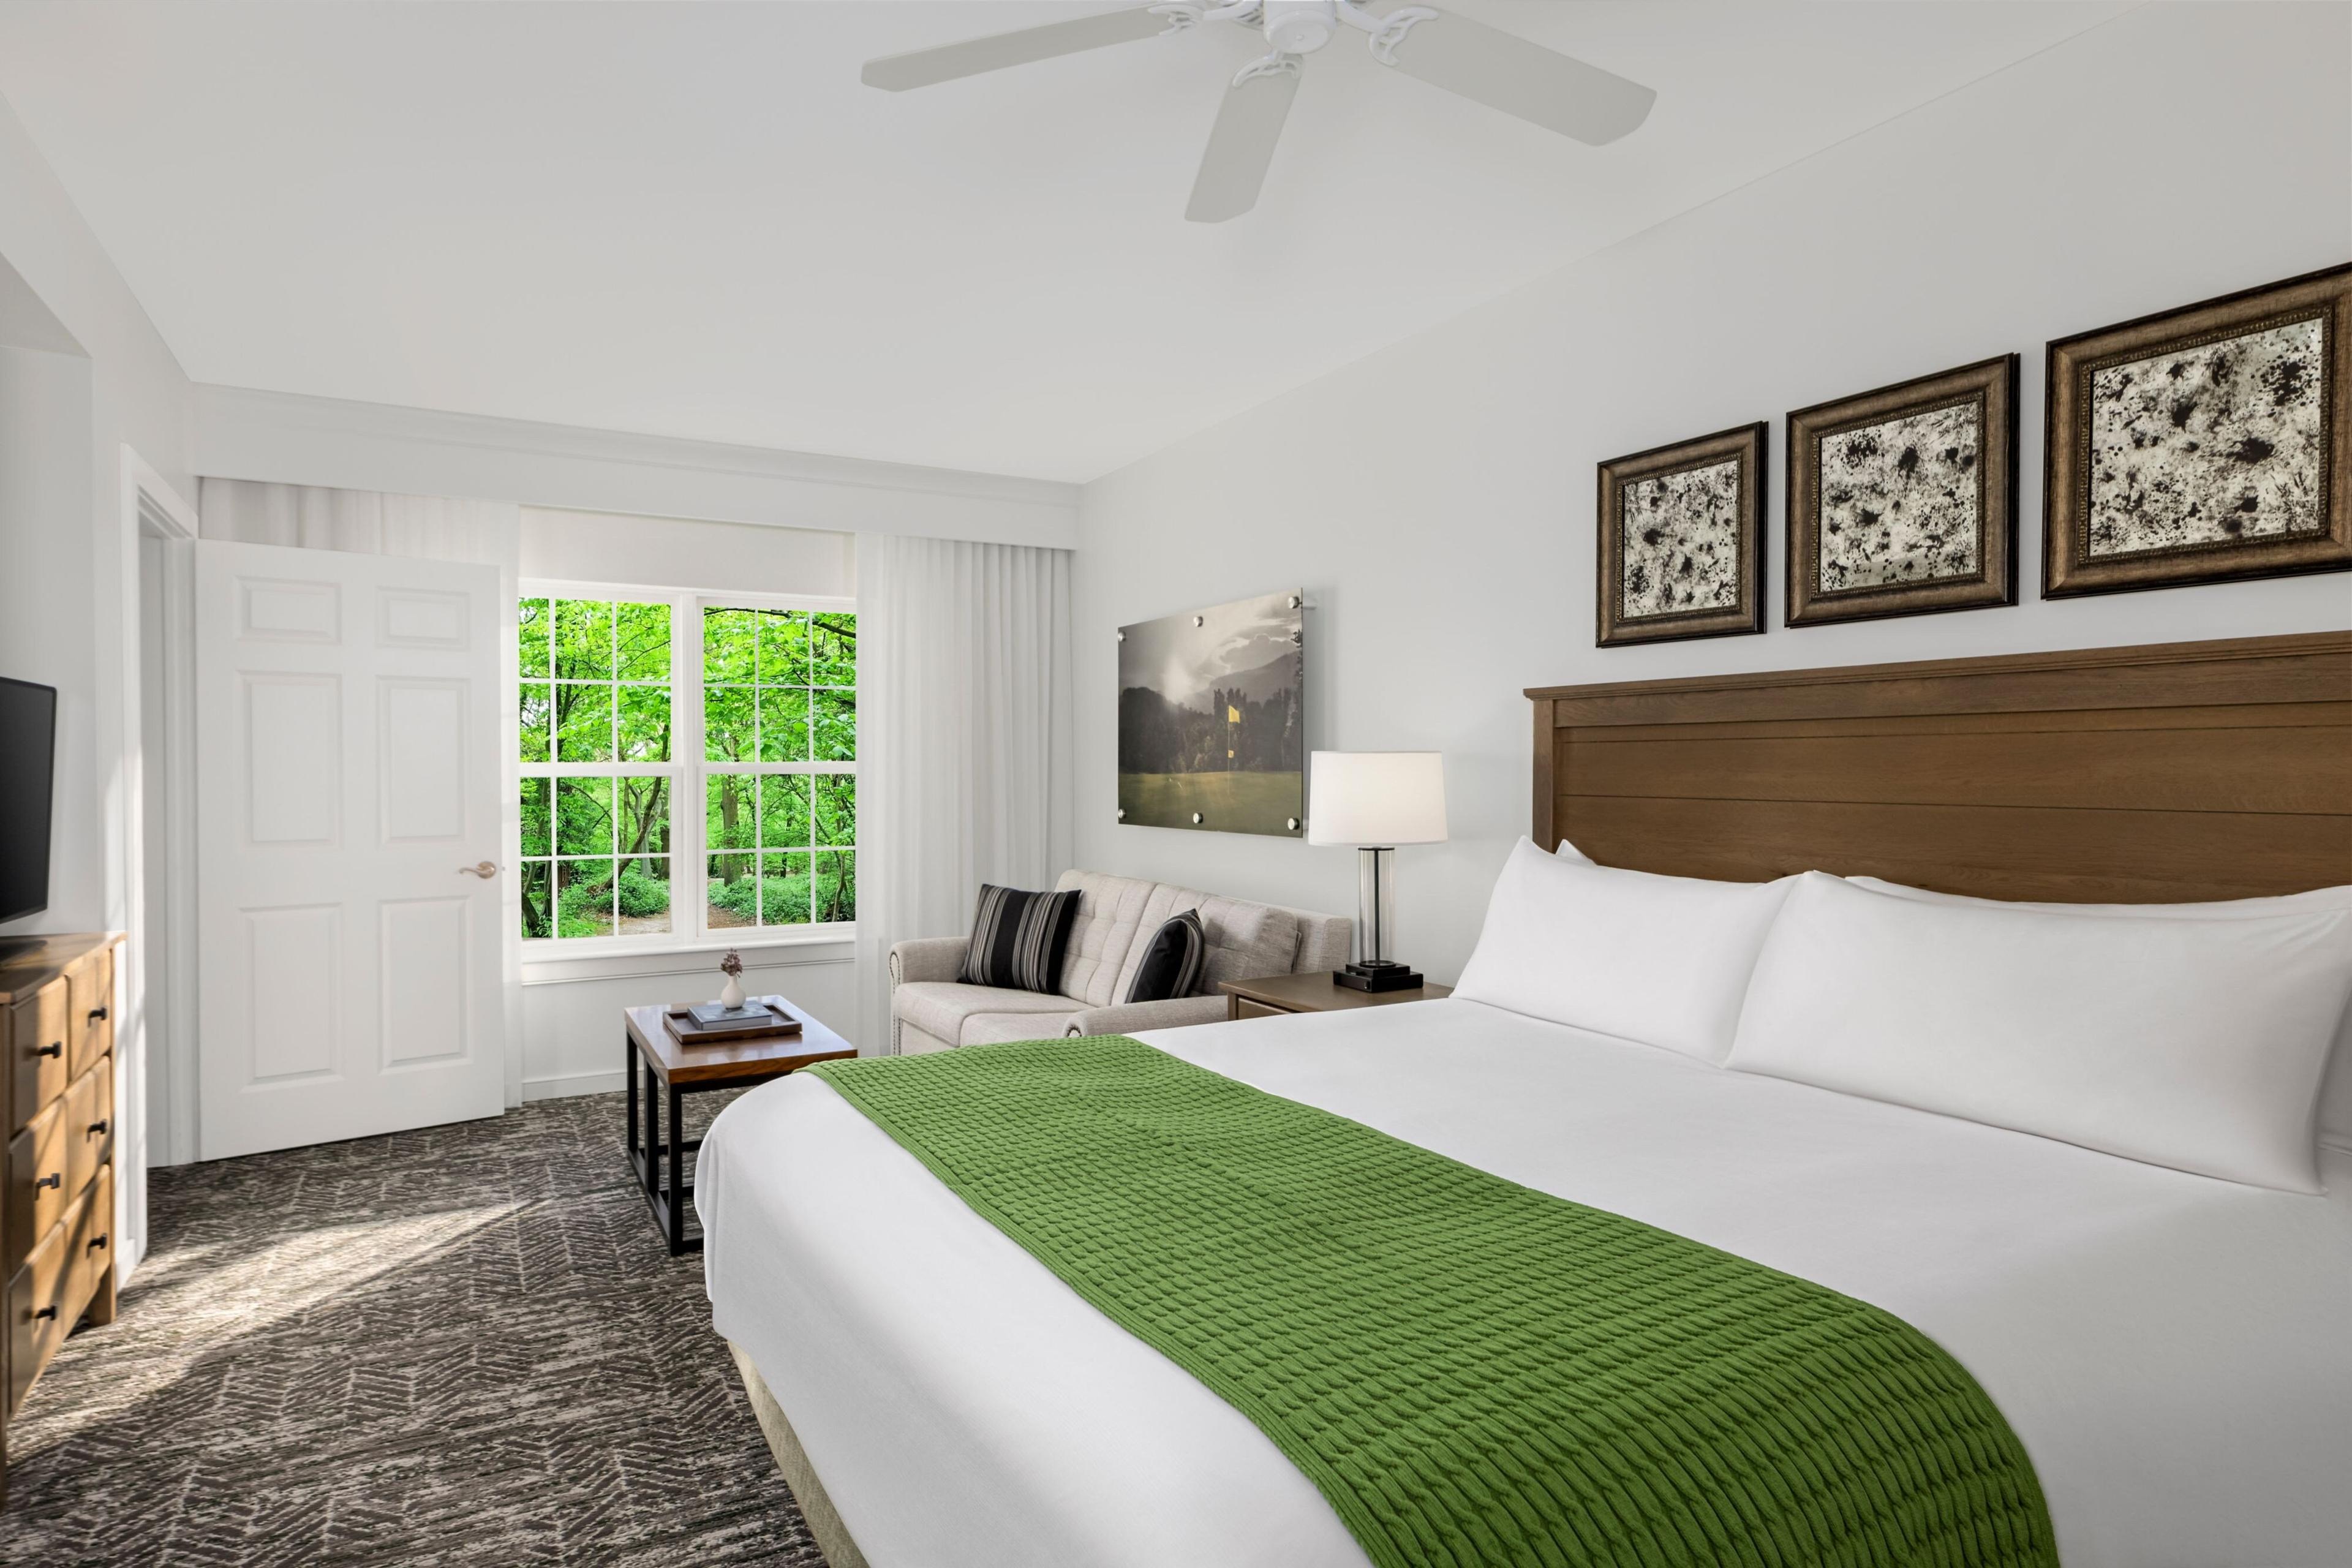 The villa second bedroom is spacious and designed for modern comfort, including a king bed with plush linens and a comfortable seating area with a pull-out couch, perfect for groups visiting Atlantic City.